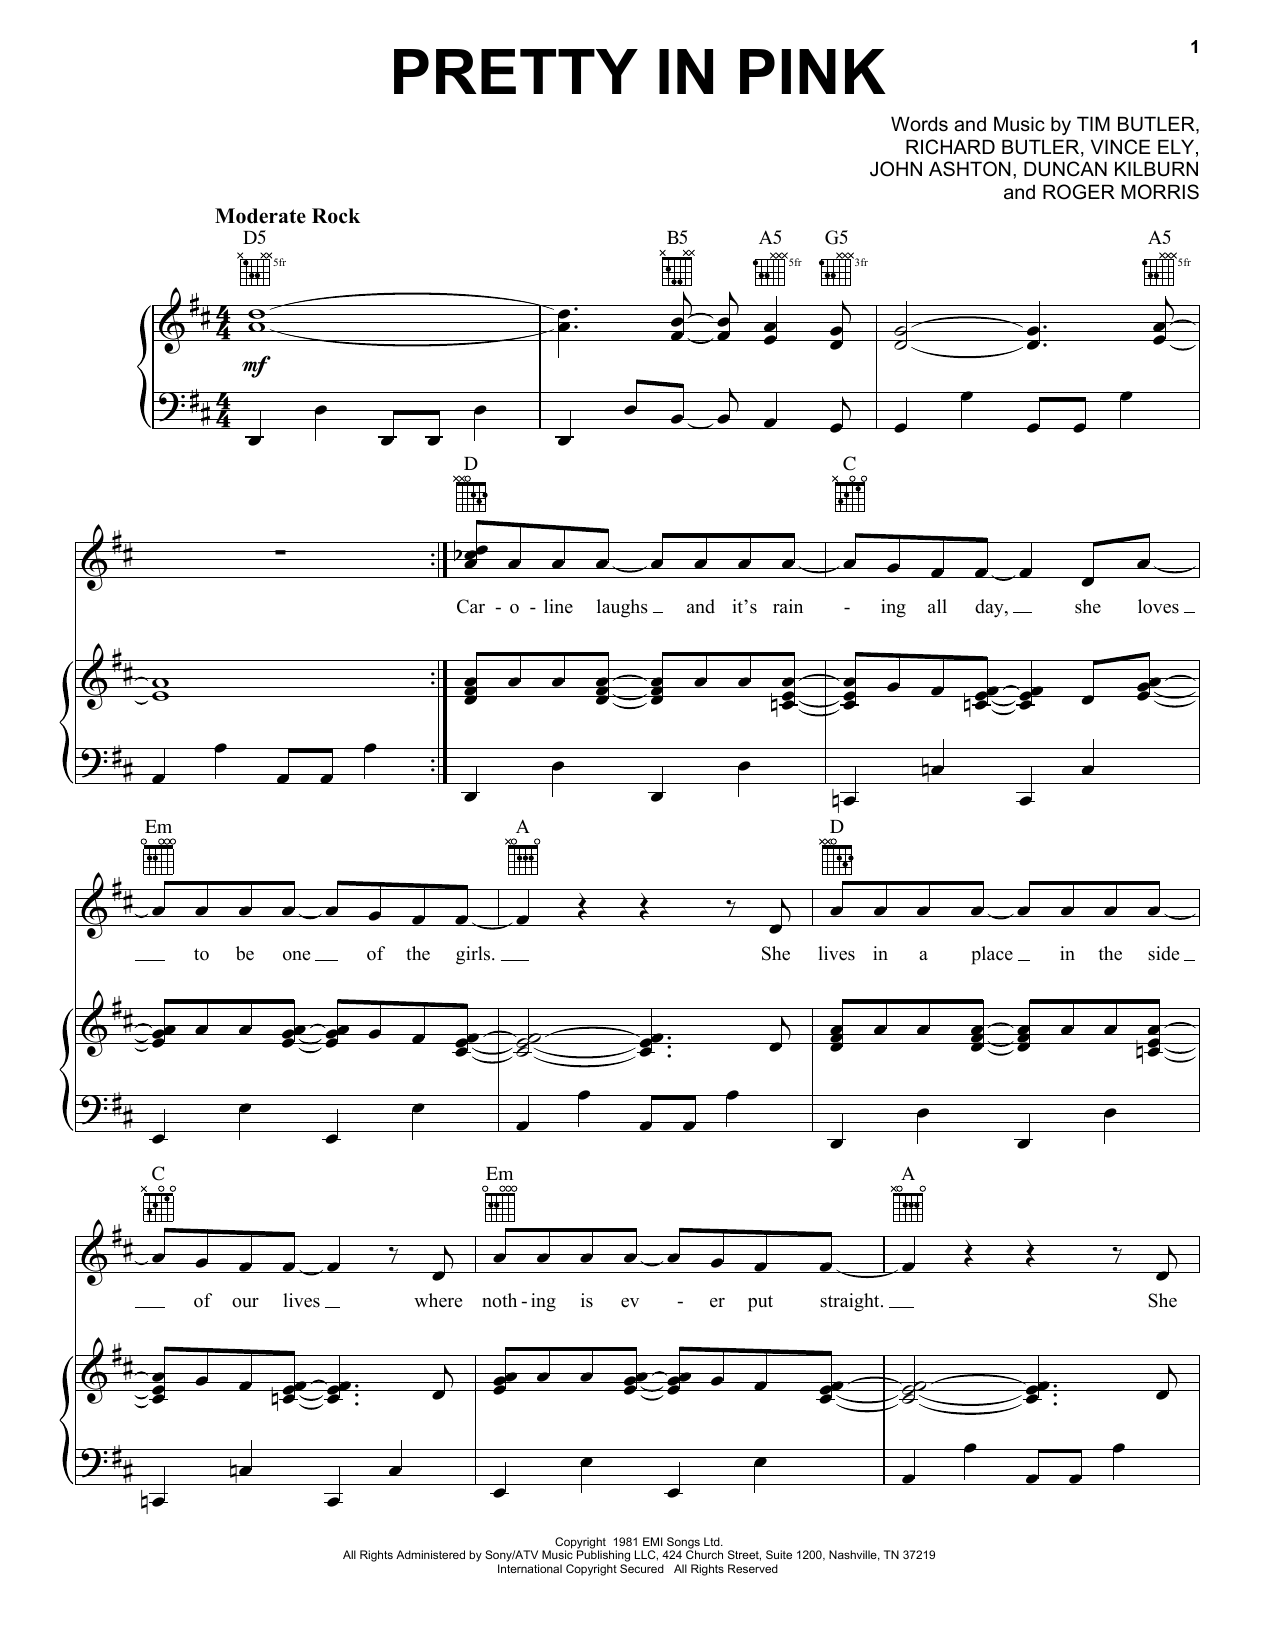 Download The Psychedelic Furs Pretty In Pink Sheet Music